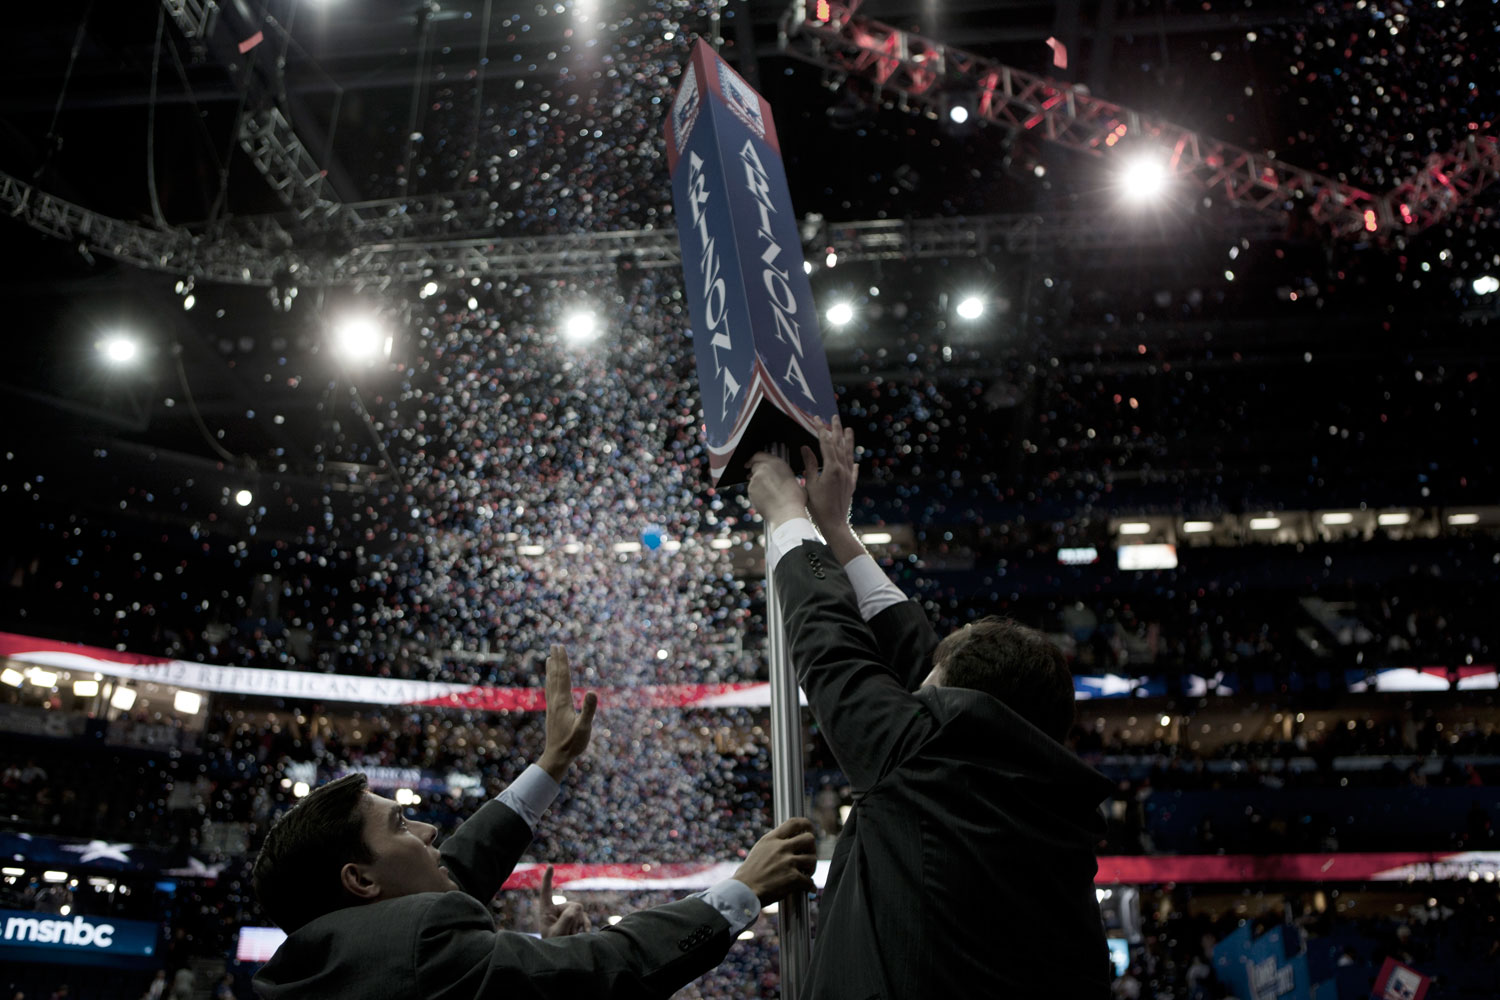 Image: The final night of the Republican National Convention in Tampa. Aug. 30, 2012.